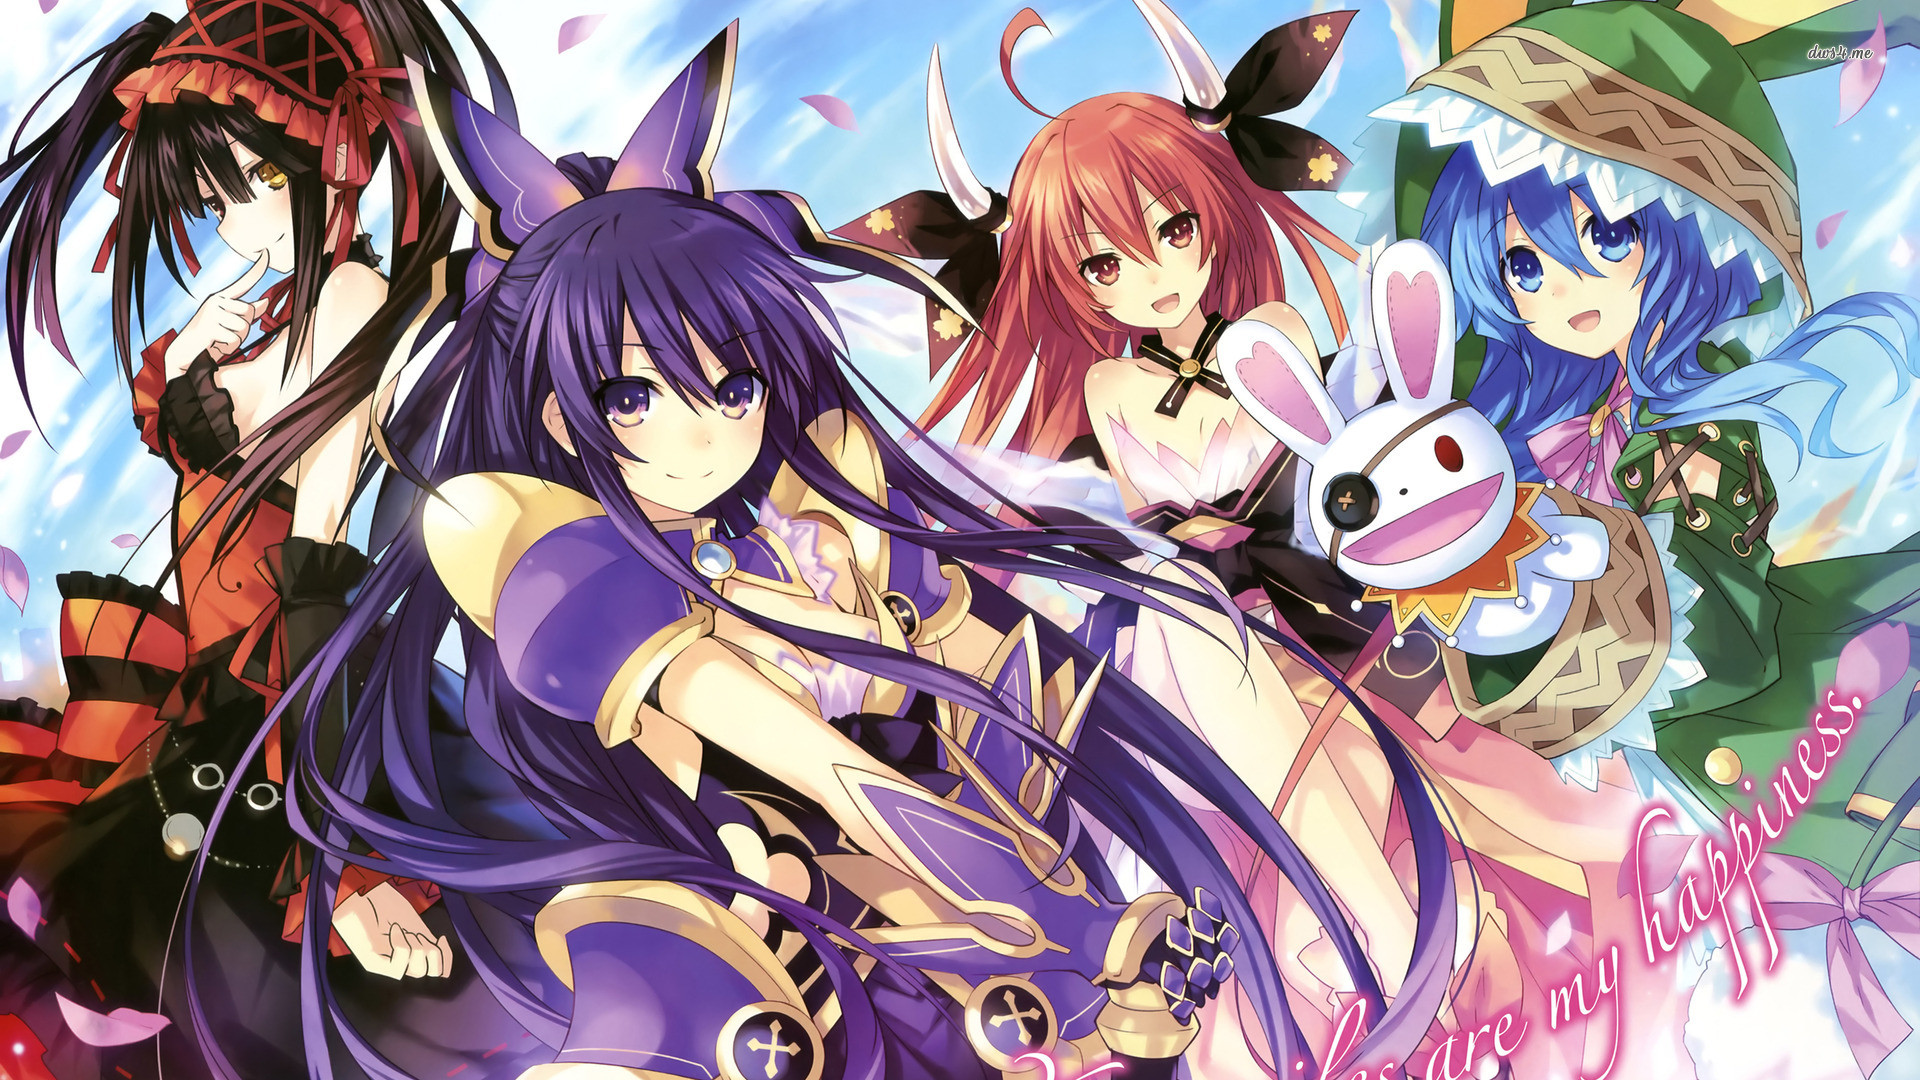 Date a Live wallpaper – Anime wallpapers –